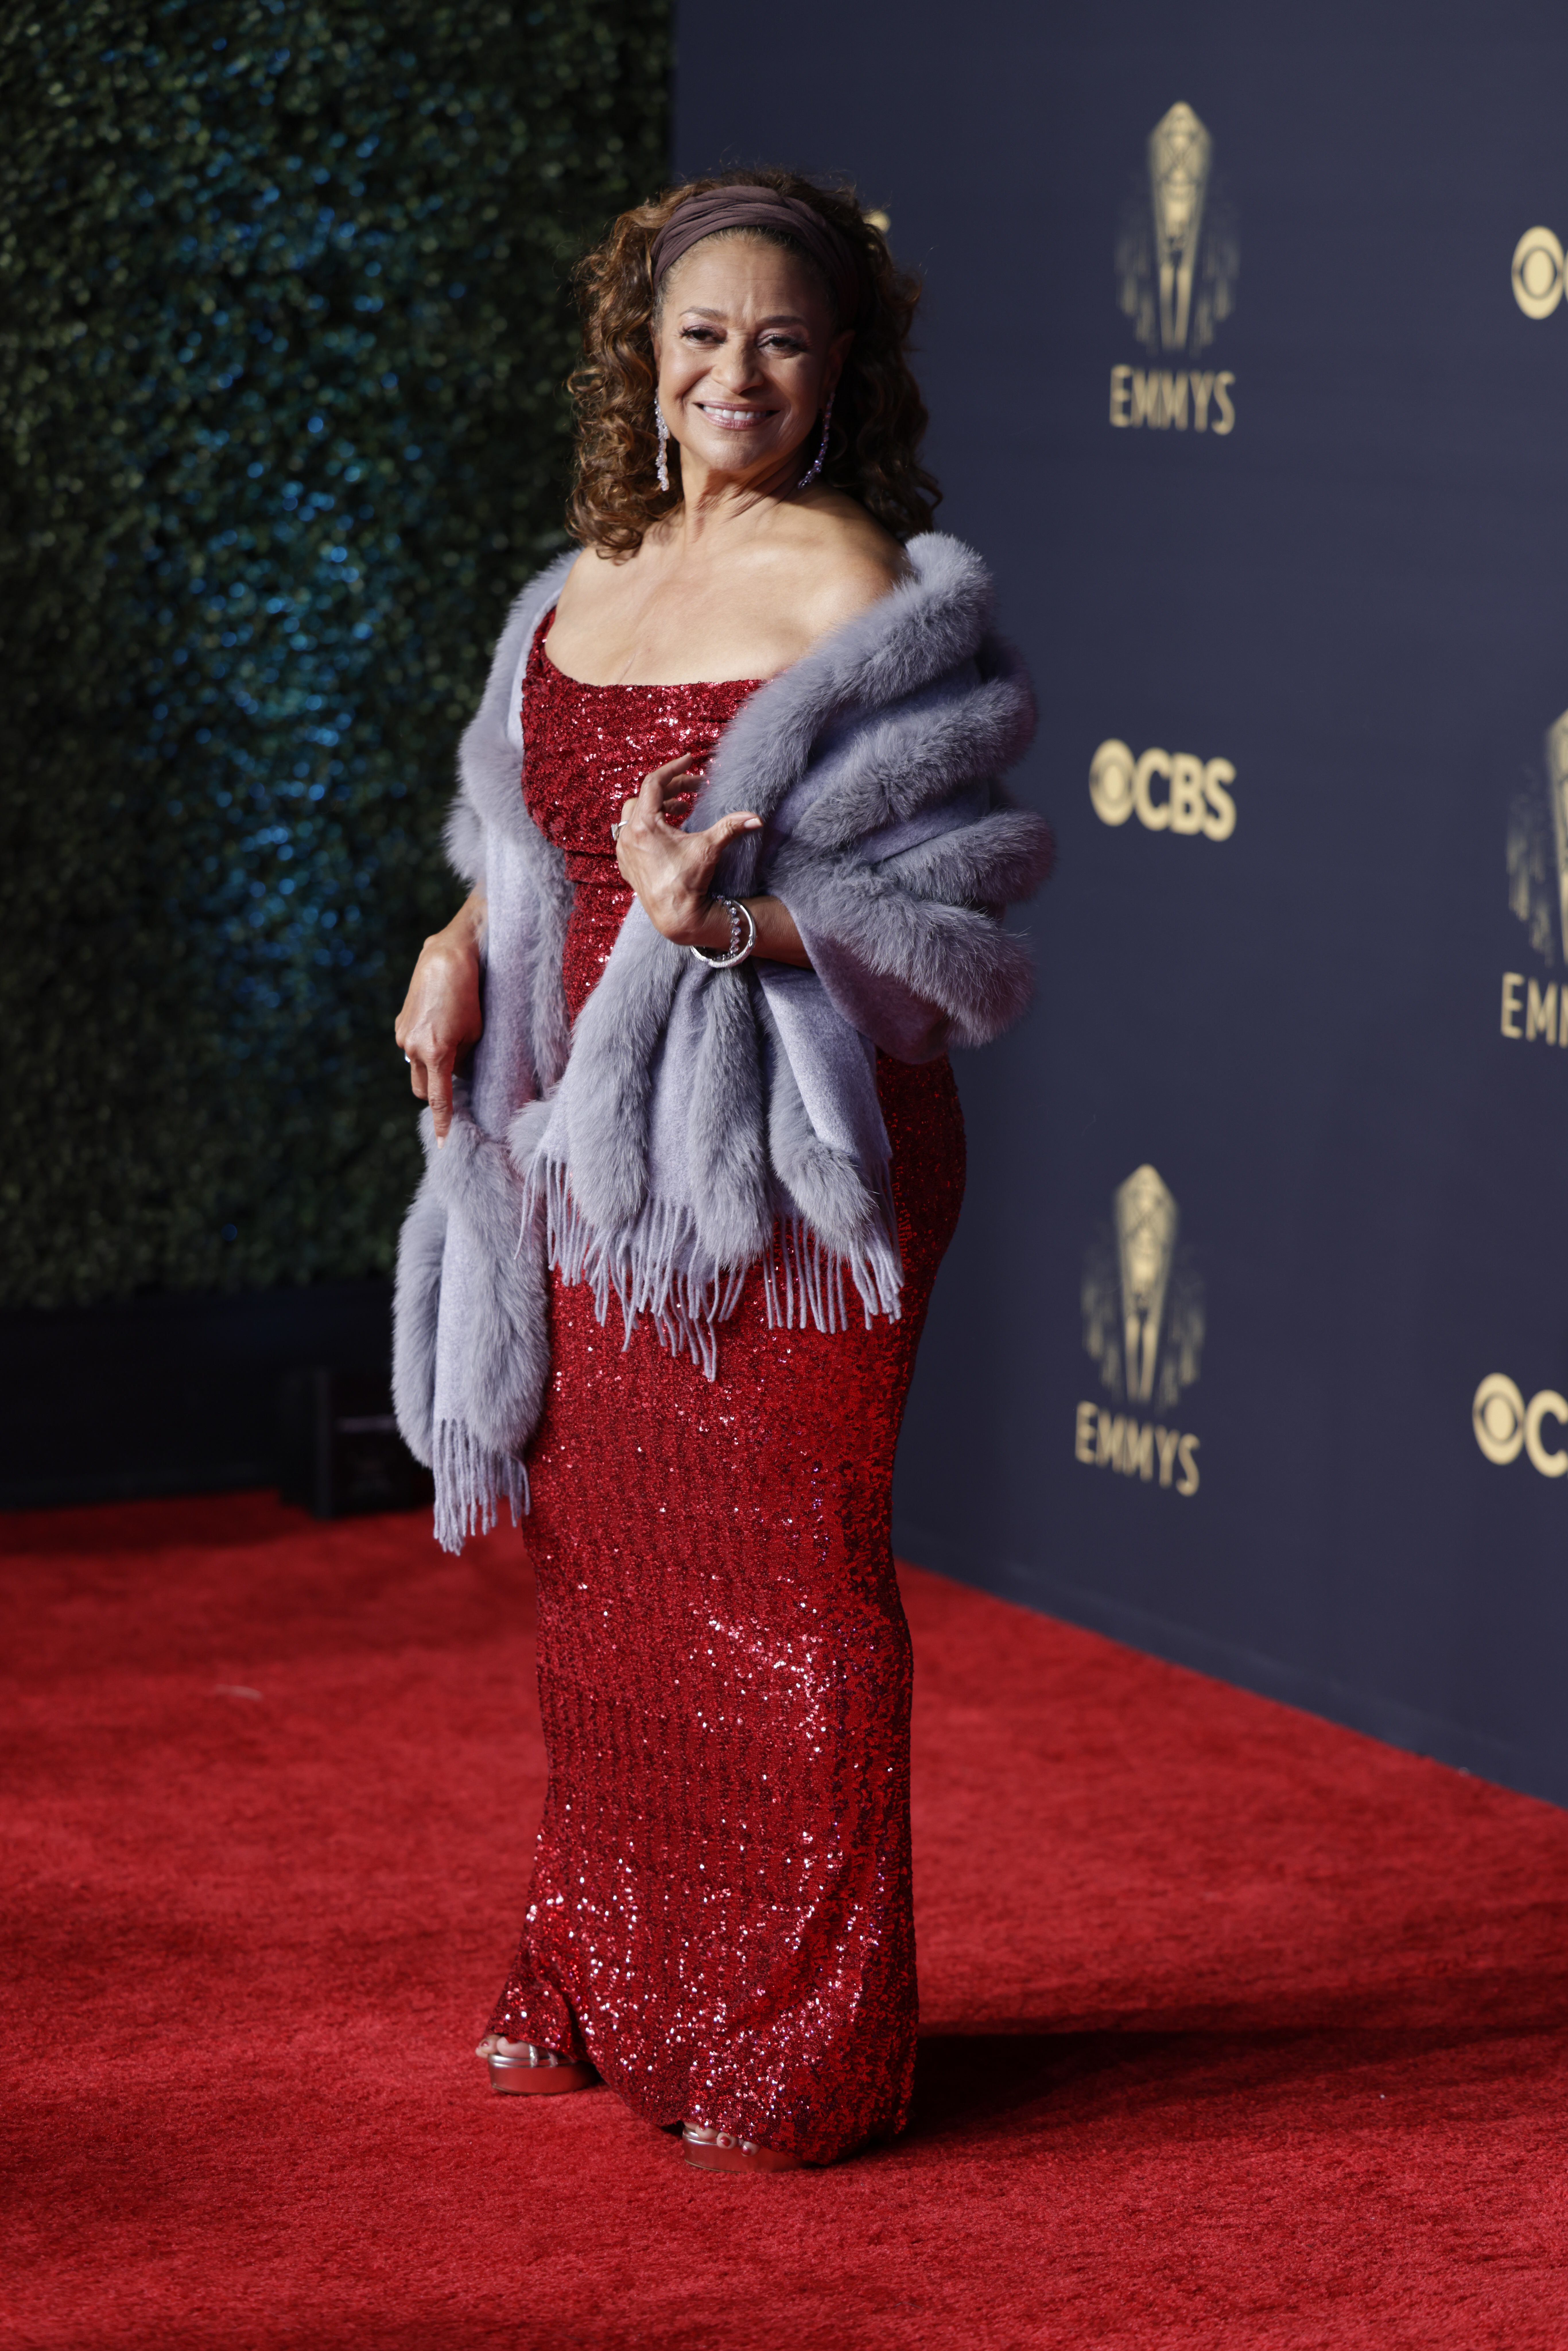 Debbie Allen at the 73rd Emmy Awards in Los Angeles, California on September 19, 2021 | Source: Getty Images